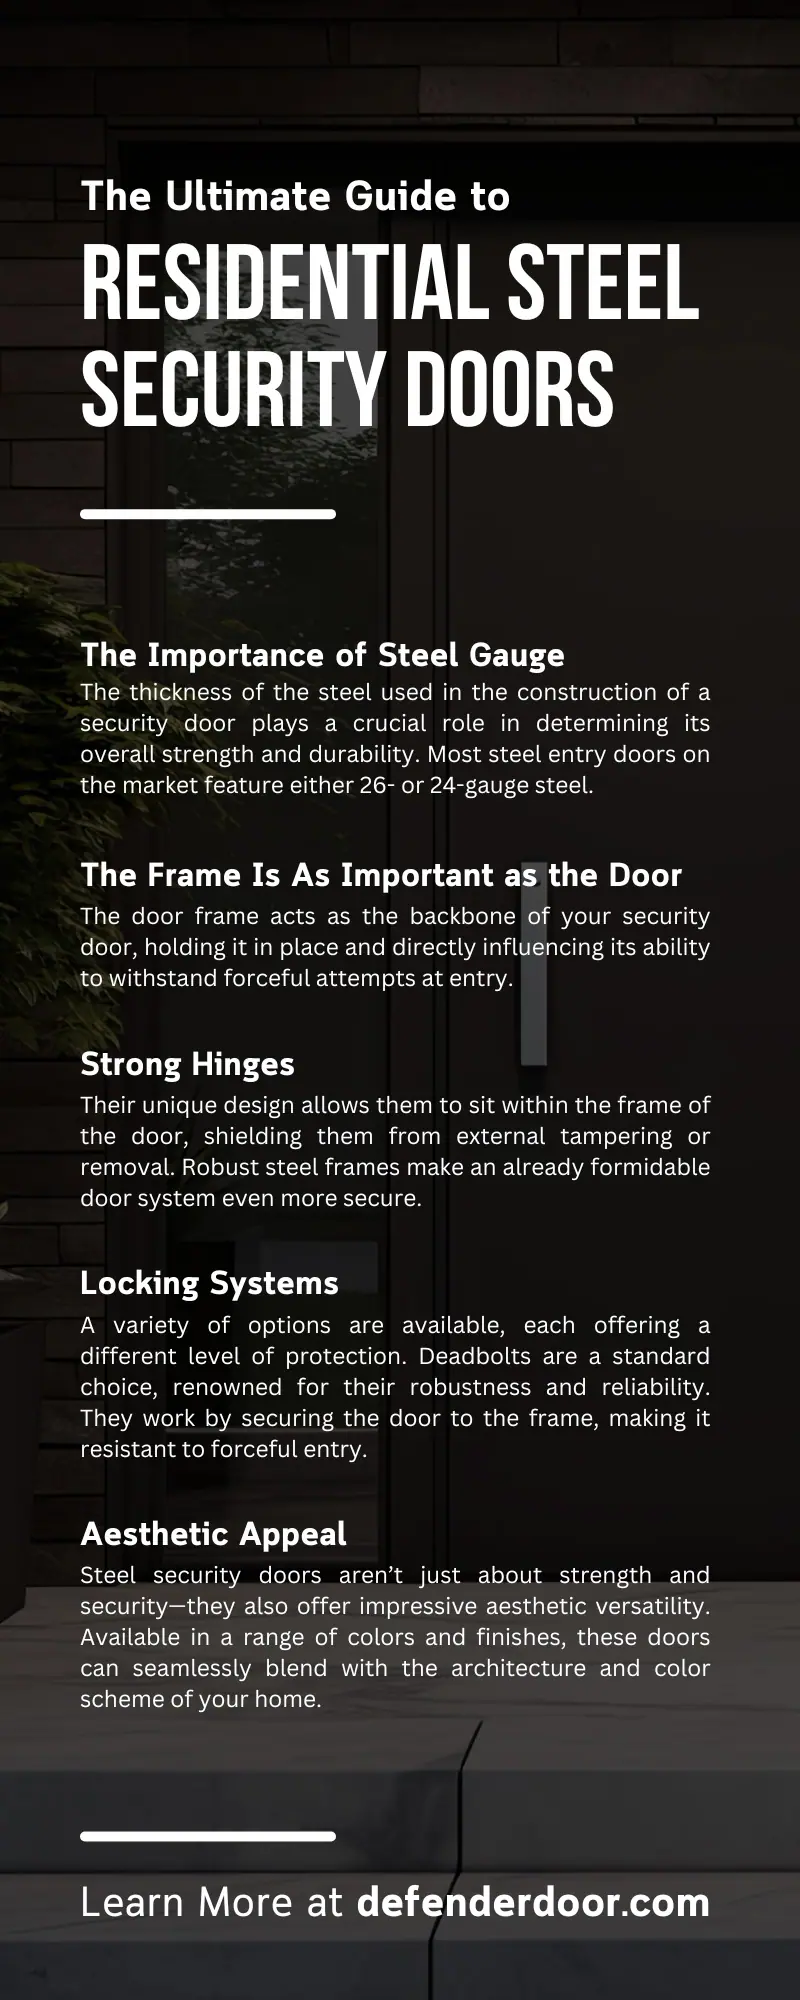 The Ultimate Guide to Residential Steel Security Doors